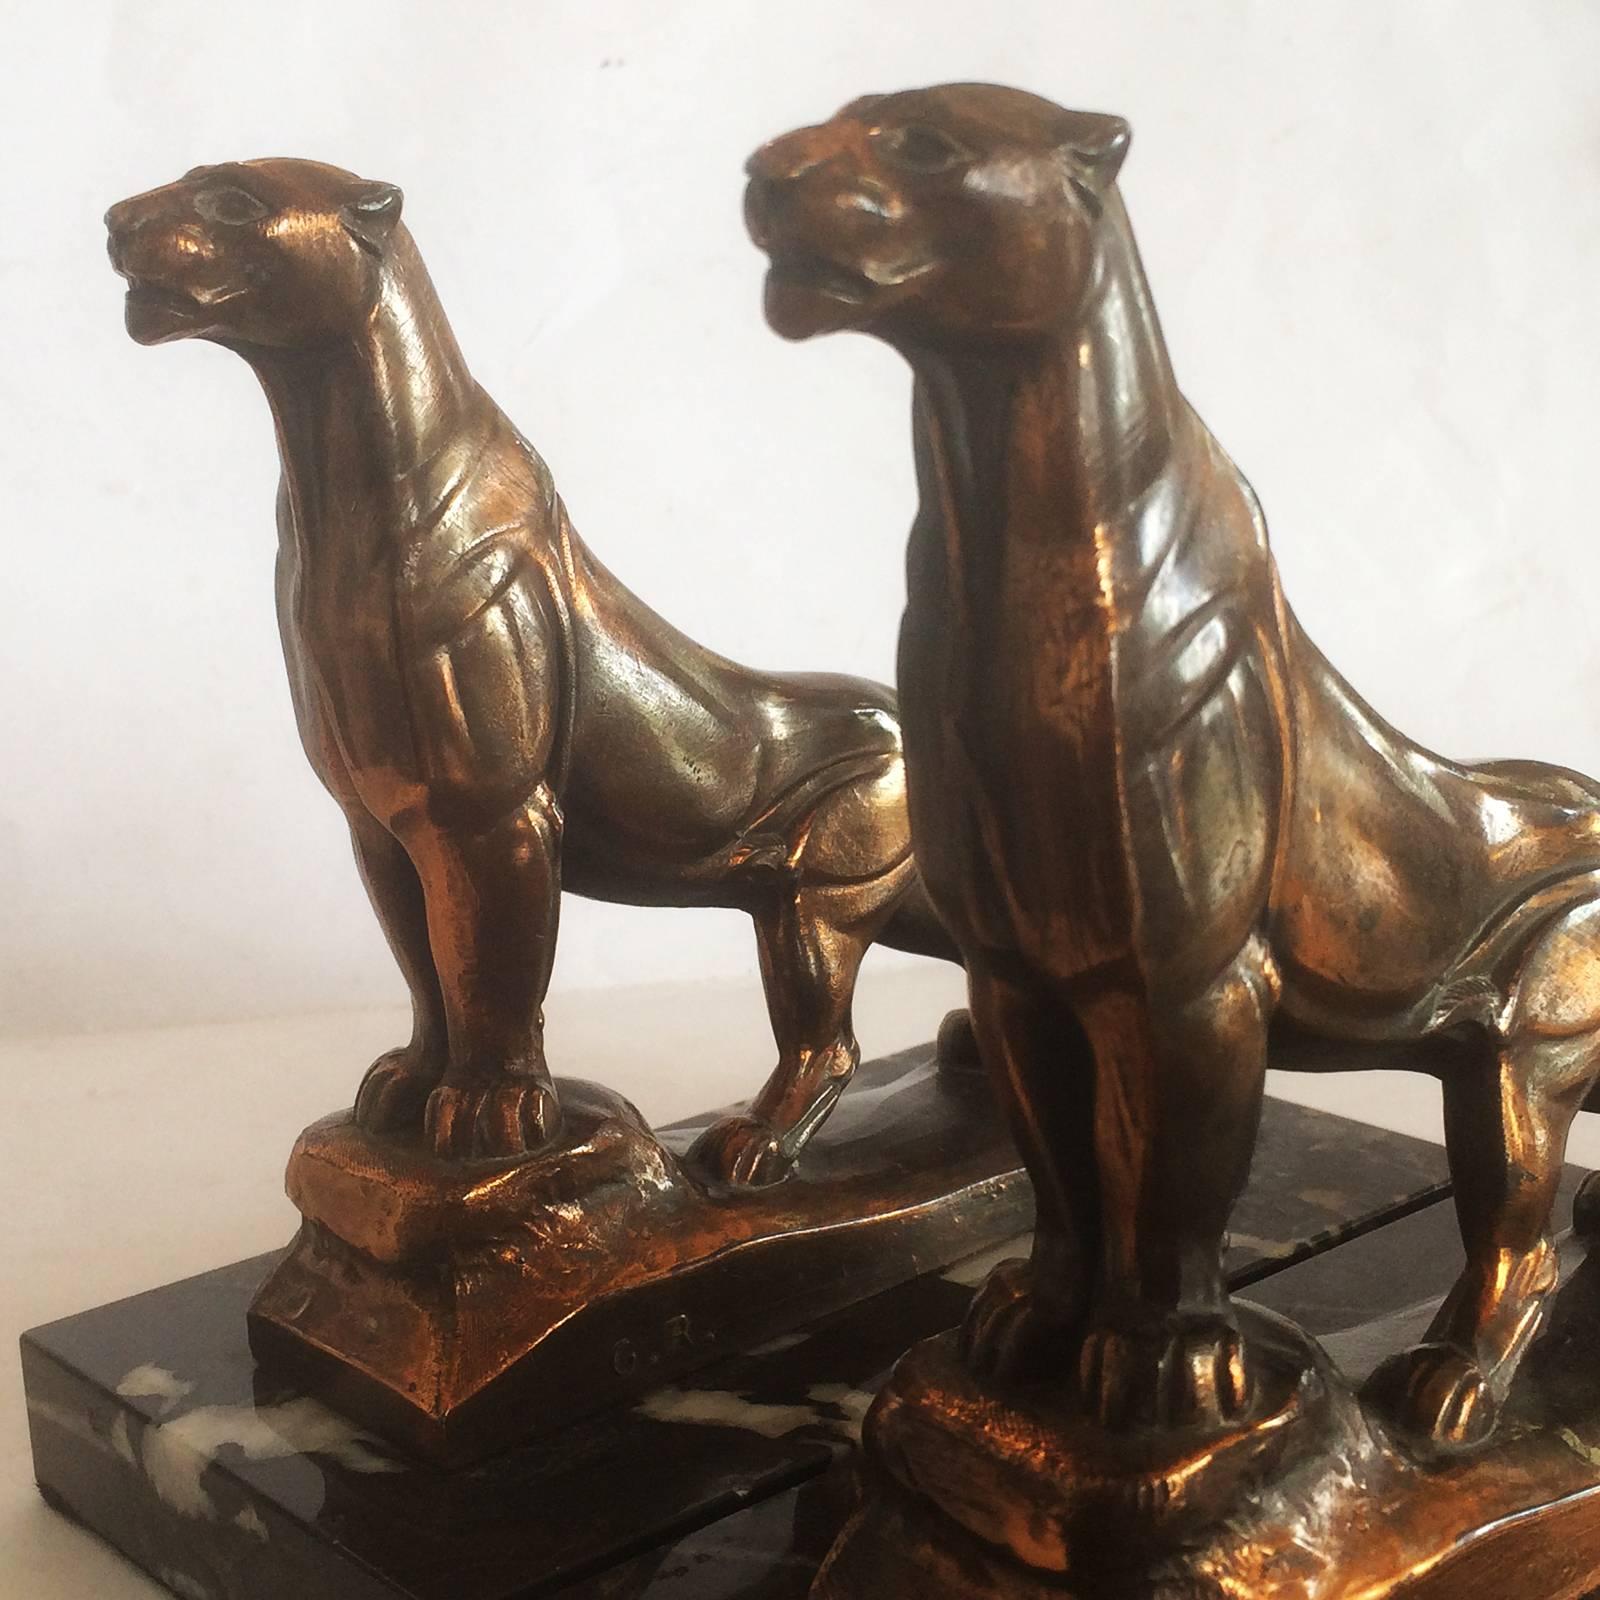 Art deco bookends panthers by Maurice Frecourt in Fonte D’arte, and signed to the side plinth of each Frecourt and on the reverse G.R. and France. Both are perfect and great attention to be atomically correct. Finished with a japanned black and